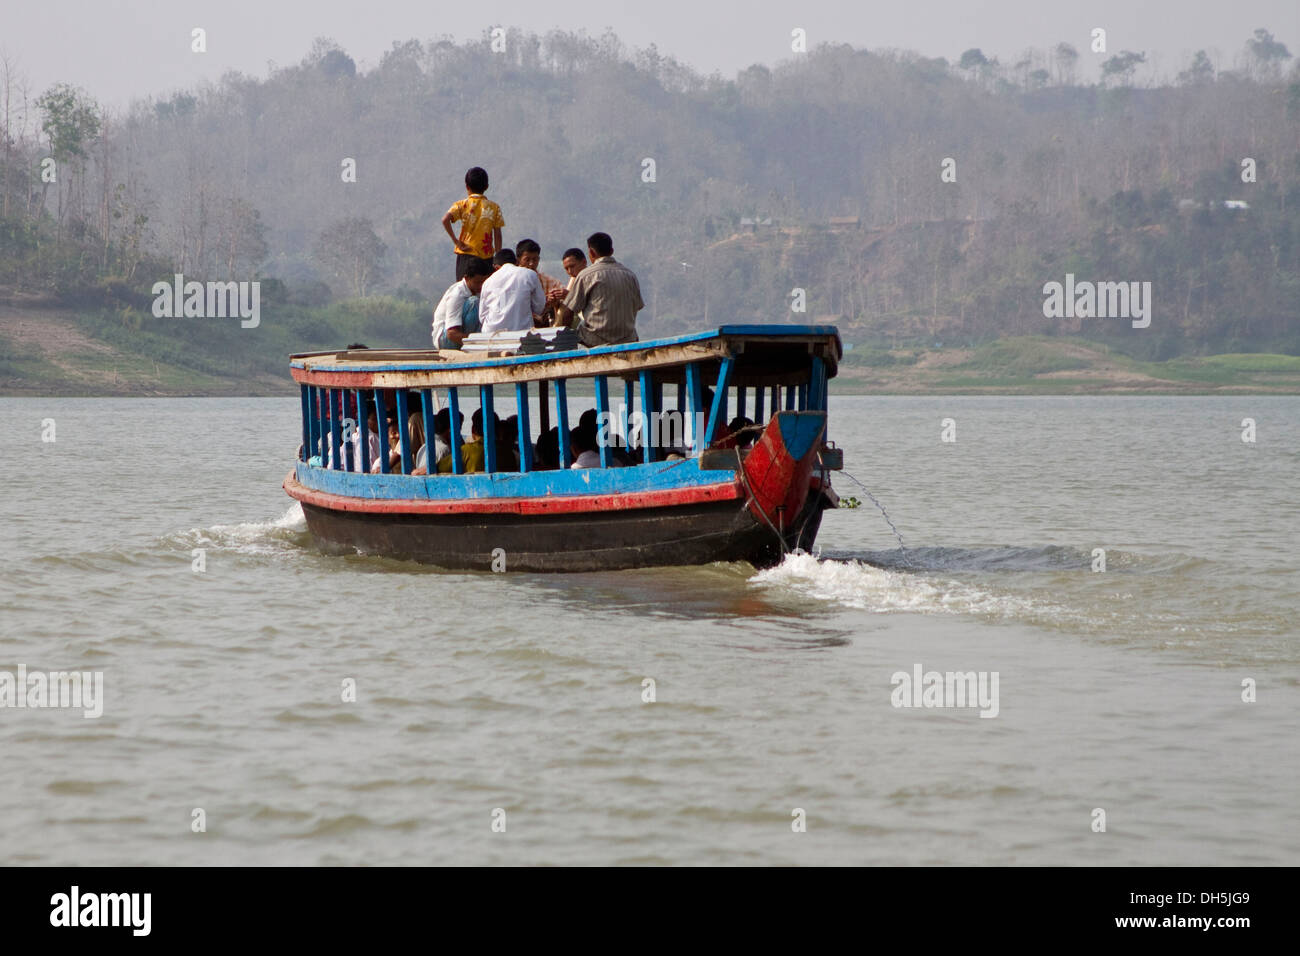 Group of people on the roof of a ferry boat, Kaptai Lake, Rangamati, Chittagong Hill Tracts, Bangladesh, South Asia, Asia Stock Photo